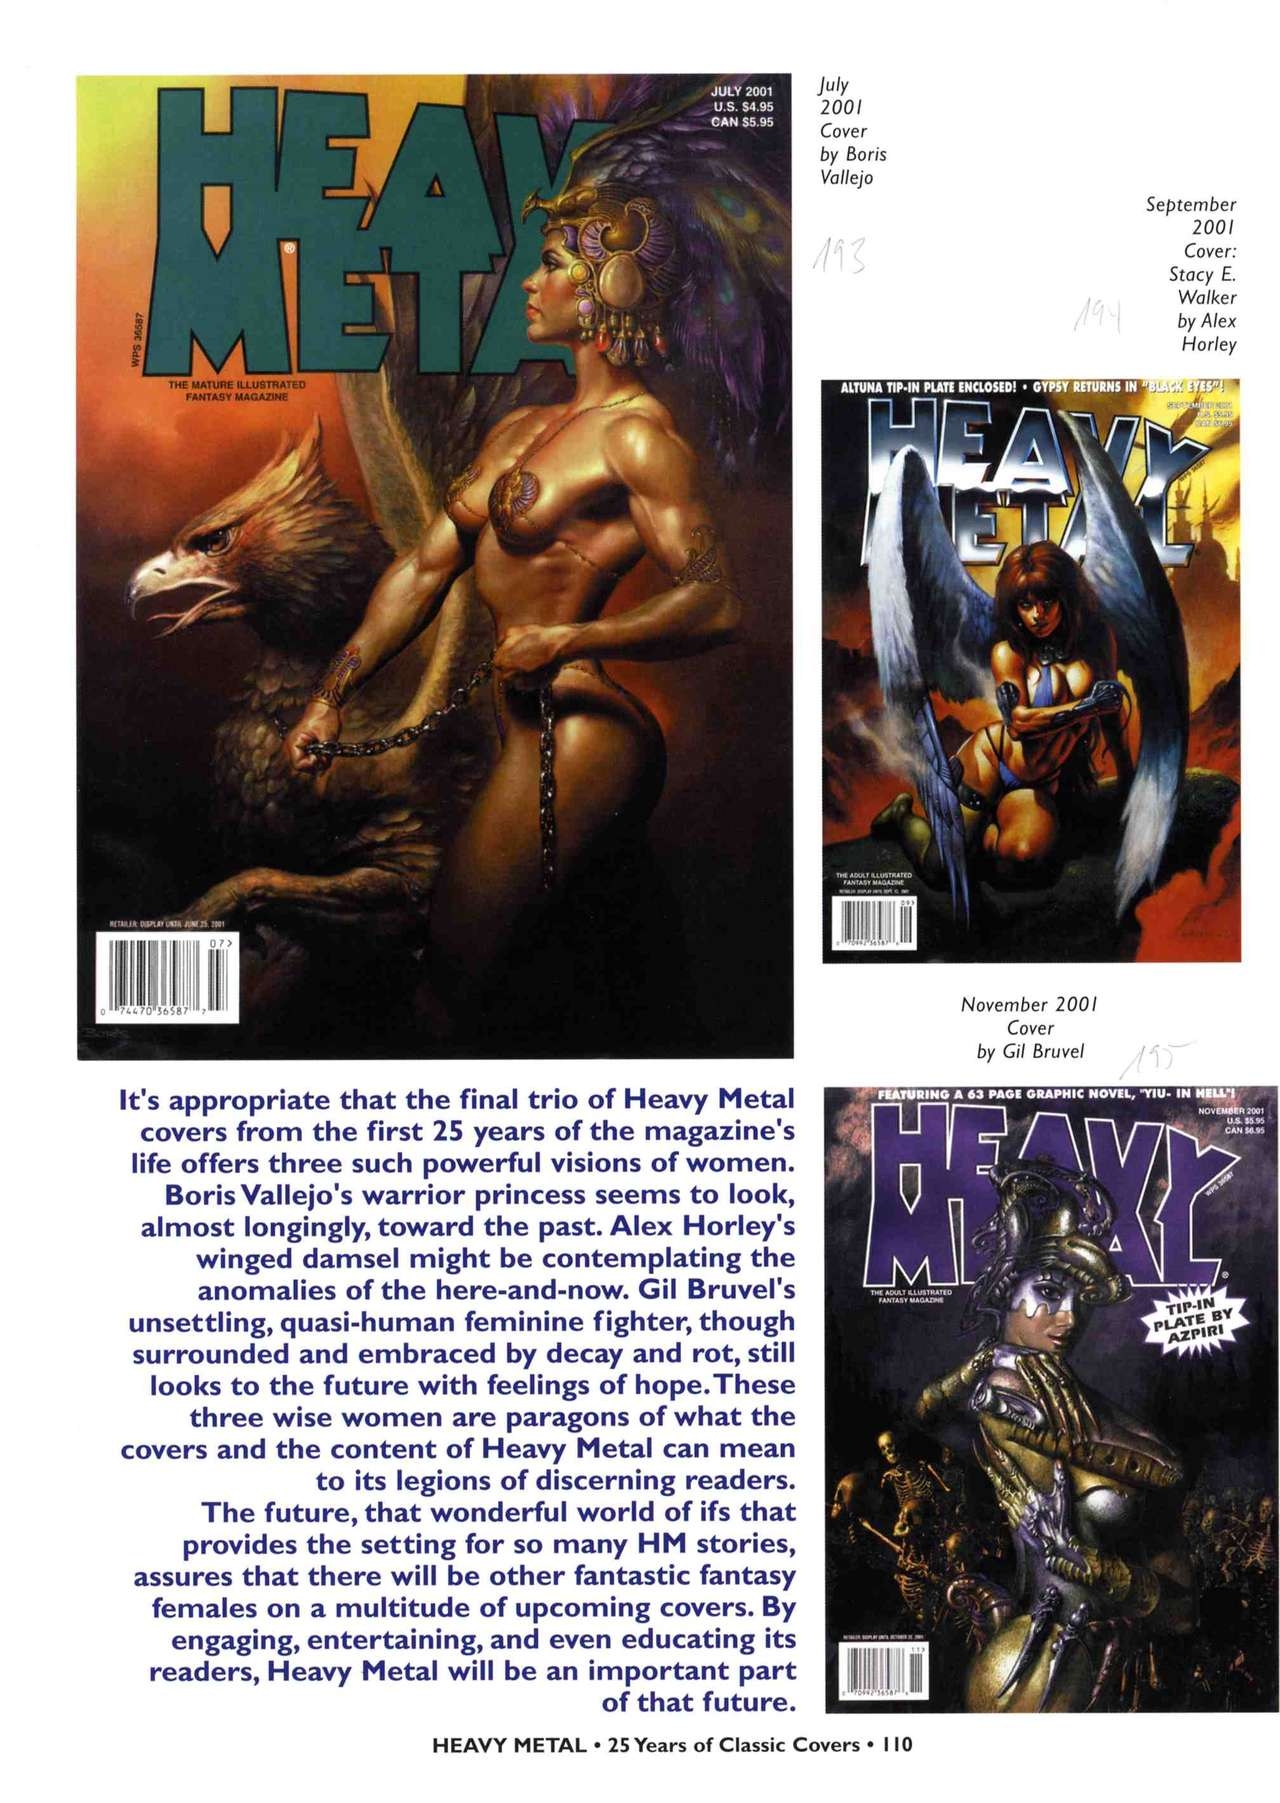 HEAVY METAL 25 Years of Classic Covers 115